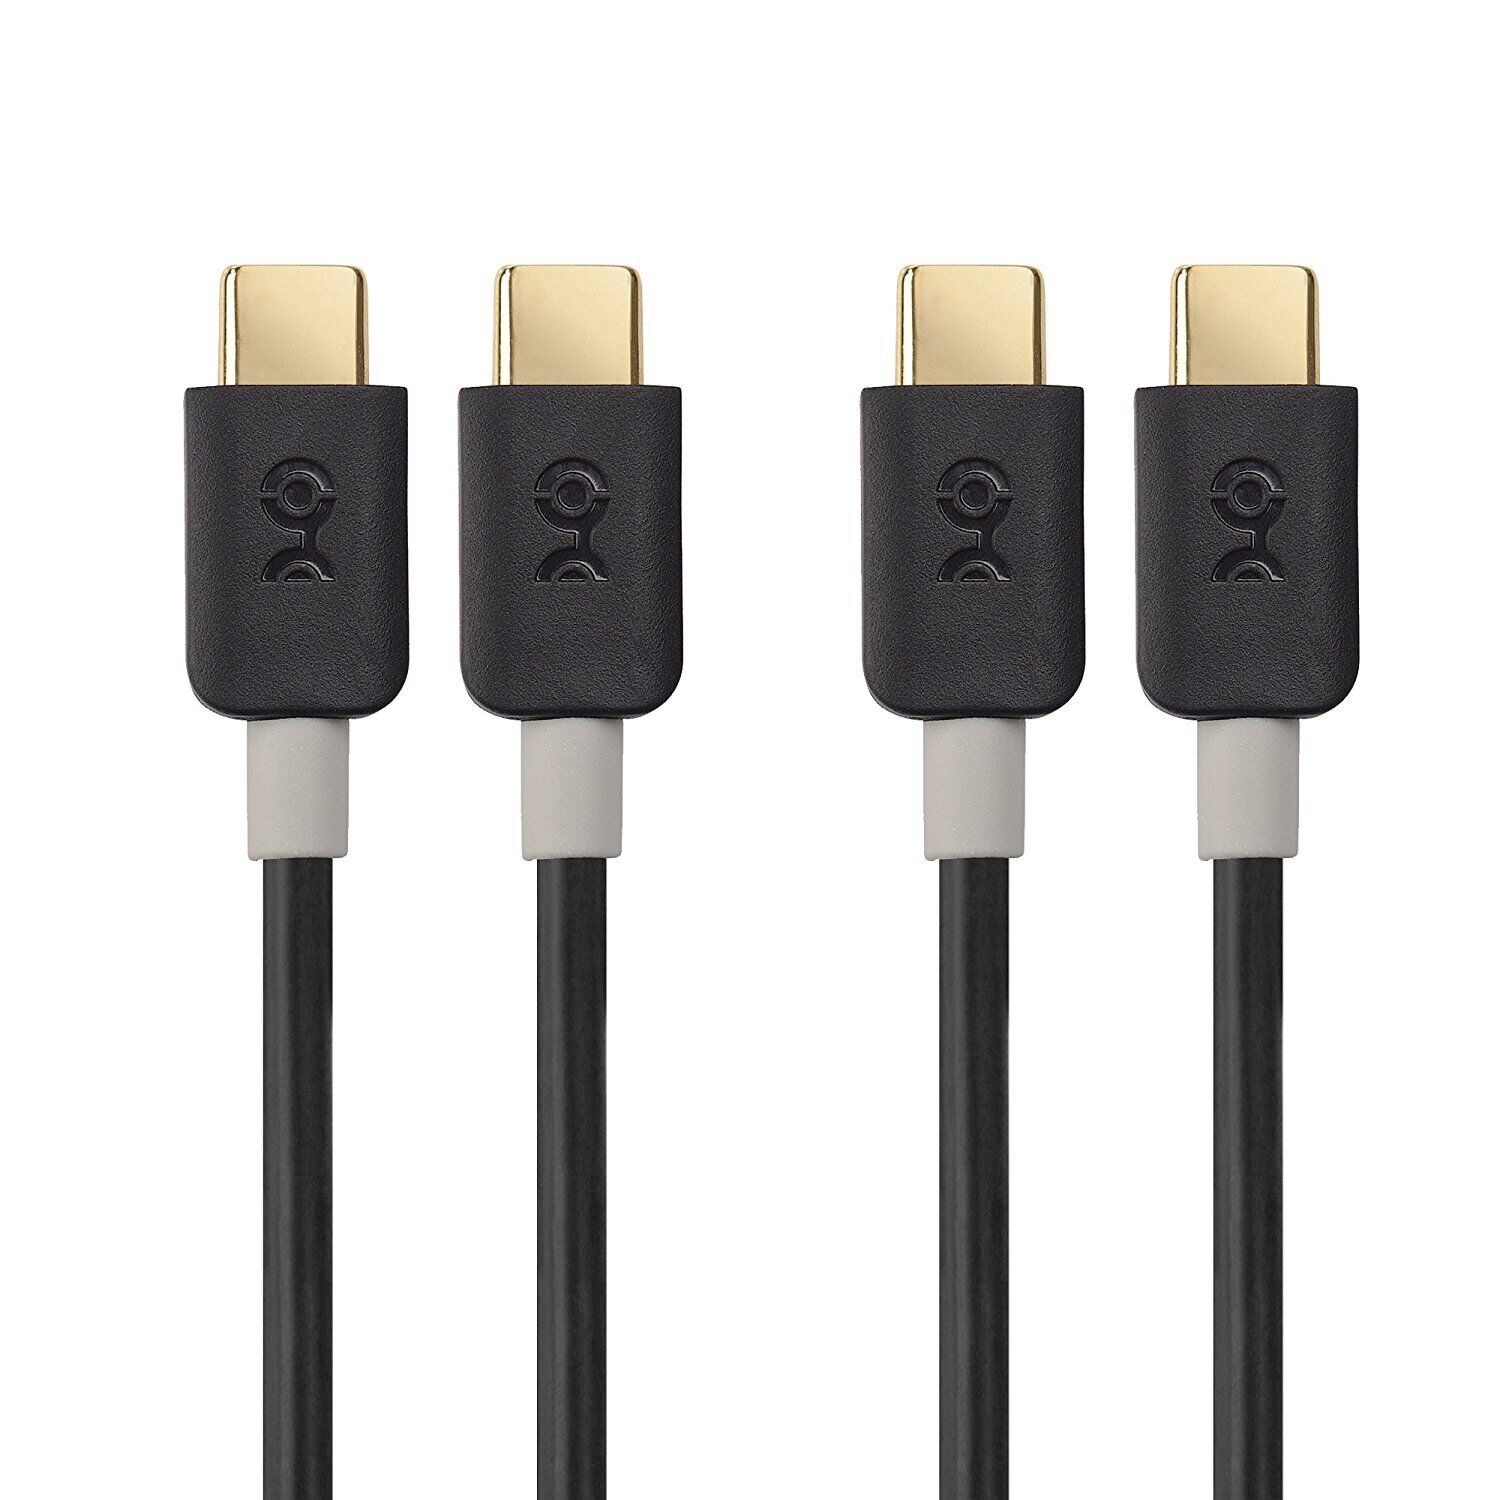 NEW Cable Matters 2-Pack Slim Series Short USB C to USB C Cable with 60W Fast...